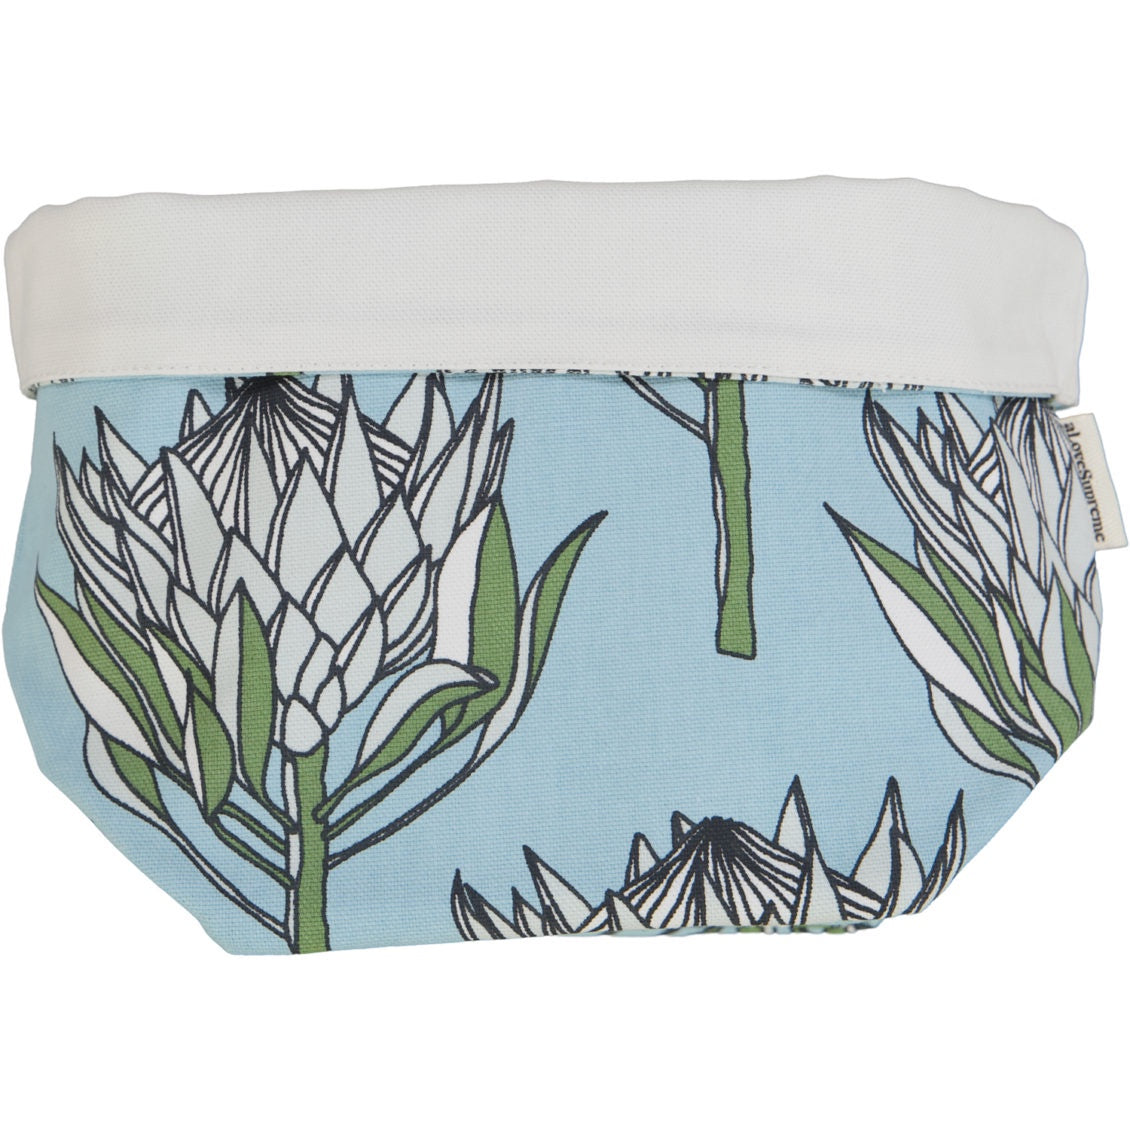 Fabric Pots/Buckets Protea King Blue On Blue Small